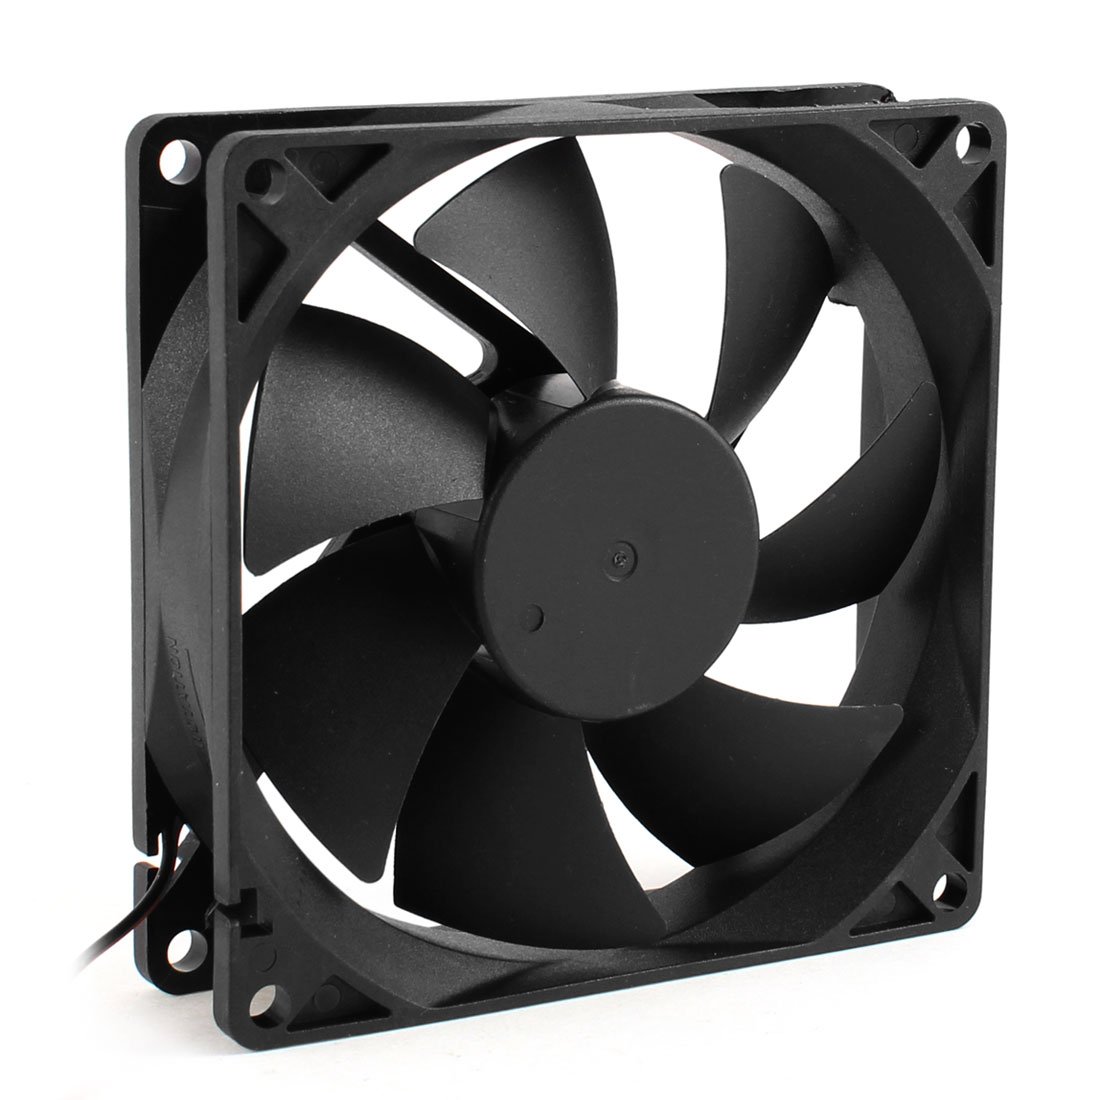 CAA Hot 92mm x 25mm 24V 2Pin Sleeve Bearing Cooling Fan for PC Case CPU Cooler